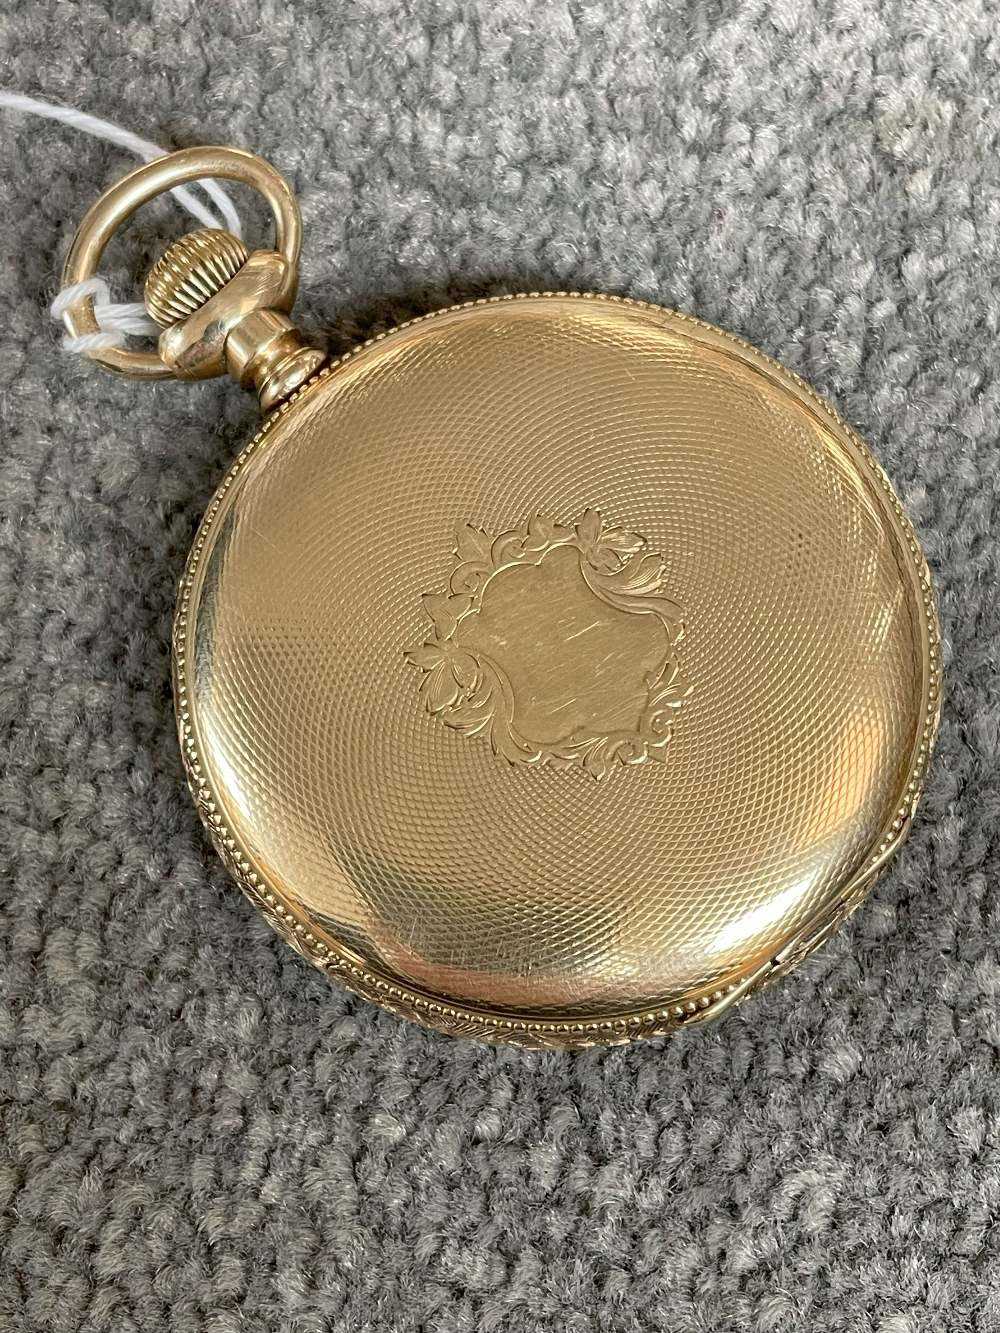 14CT GOLD AMERICAN FULL HUNTER POCKET WATCH, top wind, stepped Roman & Arabic white enamel dial - Image 3 of 14